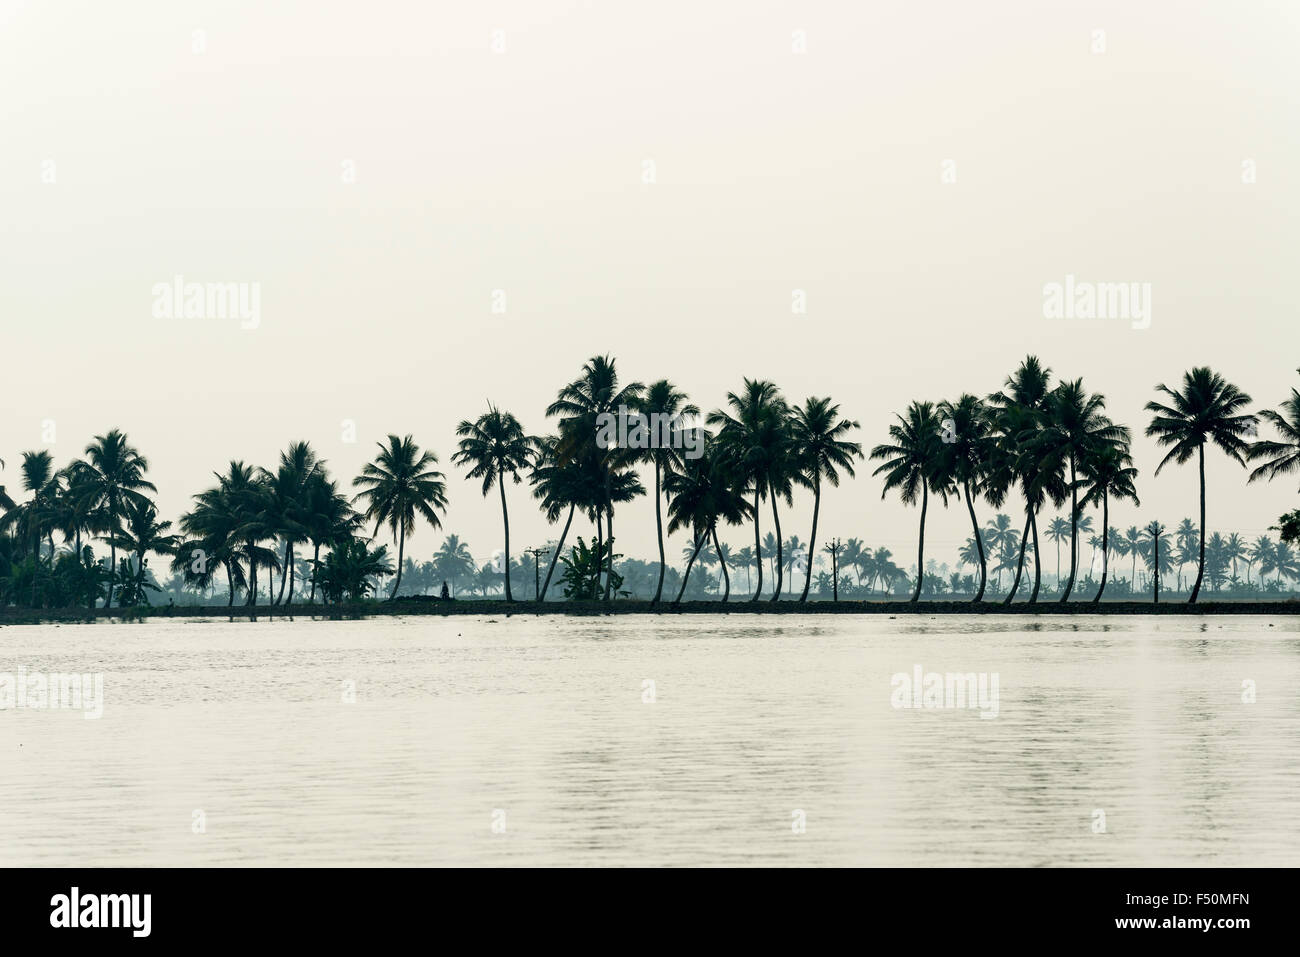 A typical landscape with water canal and palmtrees on small peninsulas in Keralas backwaters Stock Photo